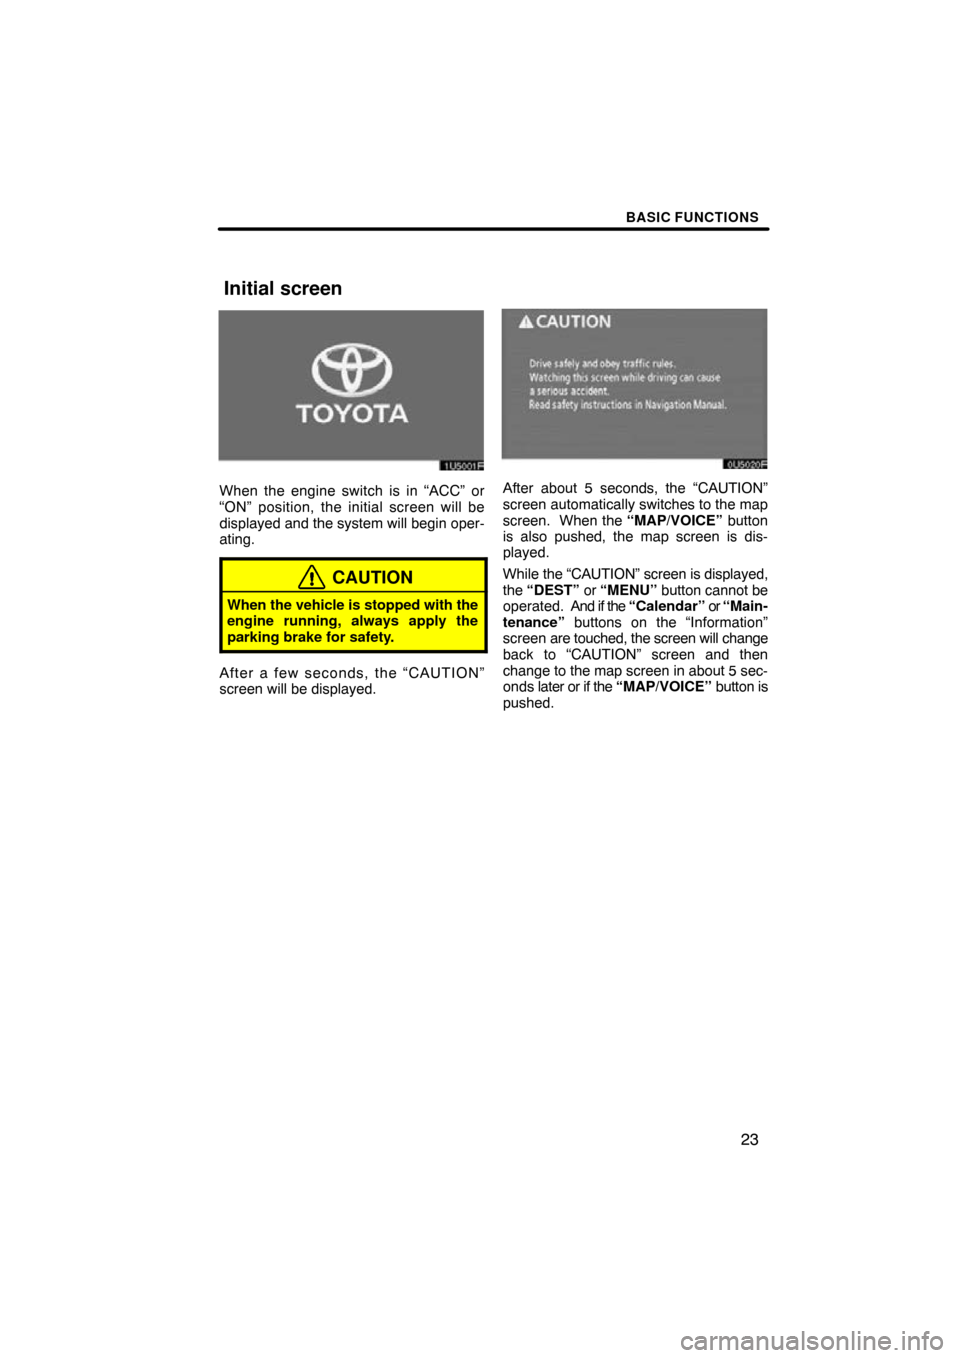 TOYOTA SIENNA 2011 XL30 / 3.G Navigation Manual BASIC FUNCTIONS
23
1U5001F
When the engine switch is in “ACC” or
“ON” position, the initial screen will be
displayed and the system will begin oper-
ating.
CAUTION
When the vehicle is stopped 